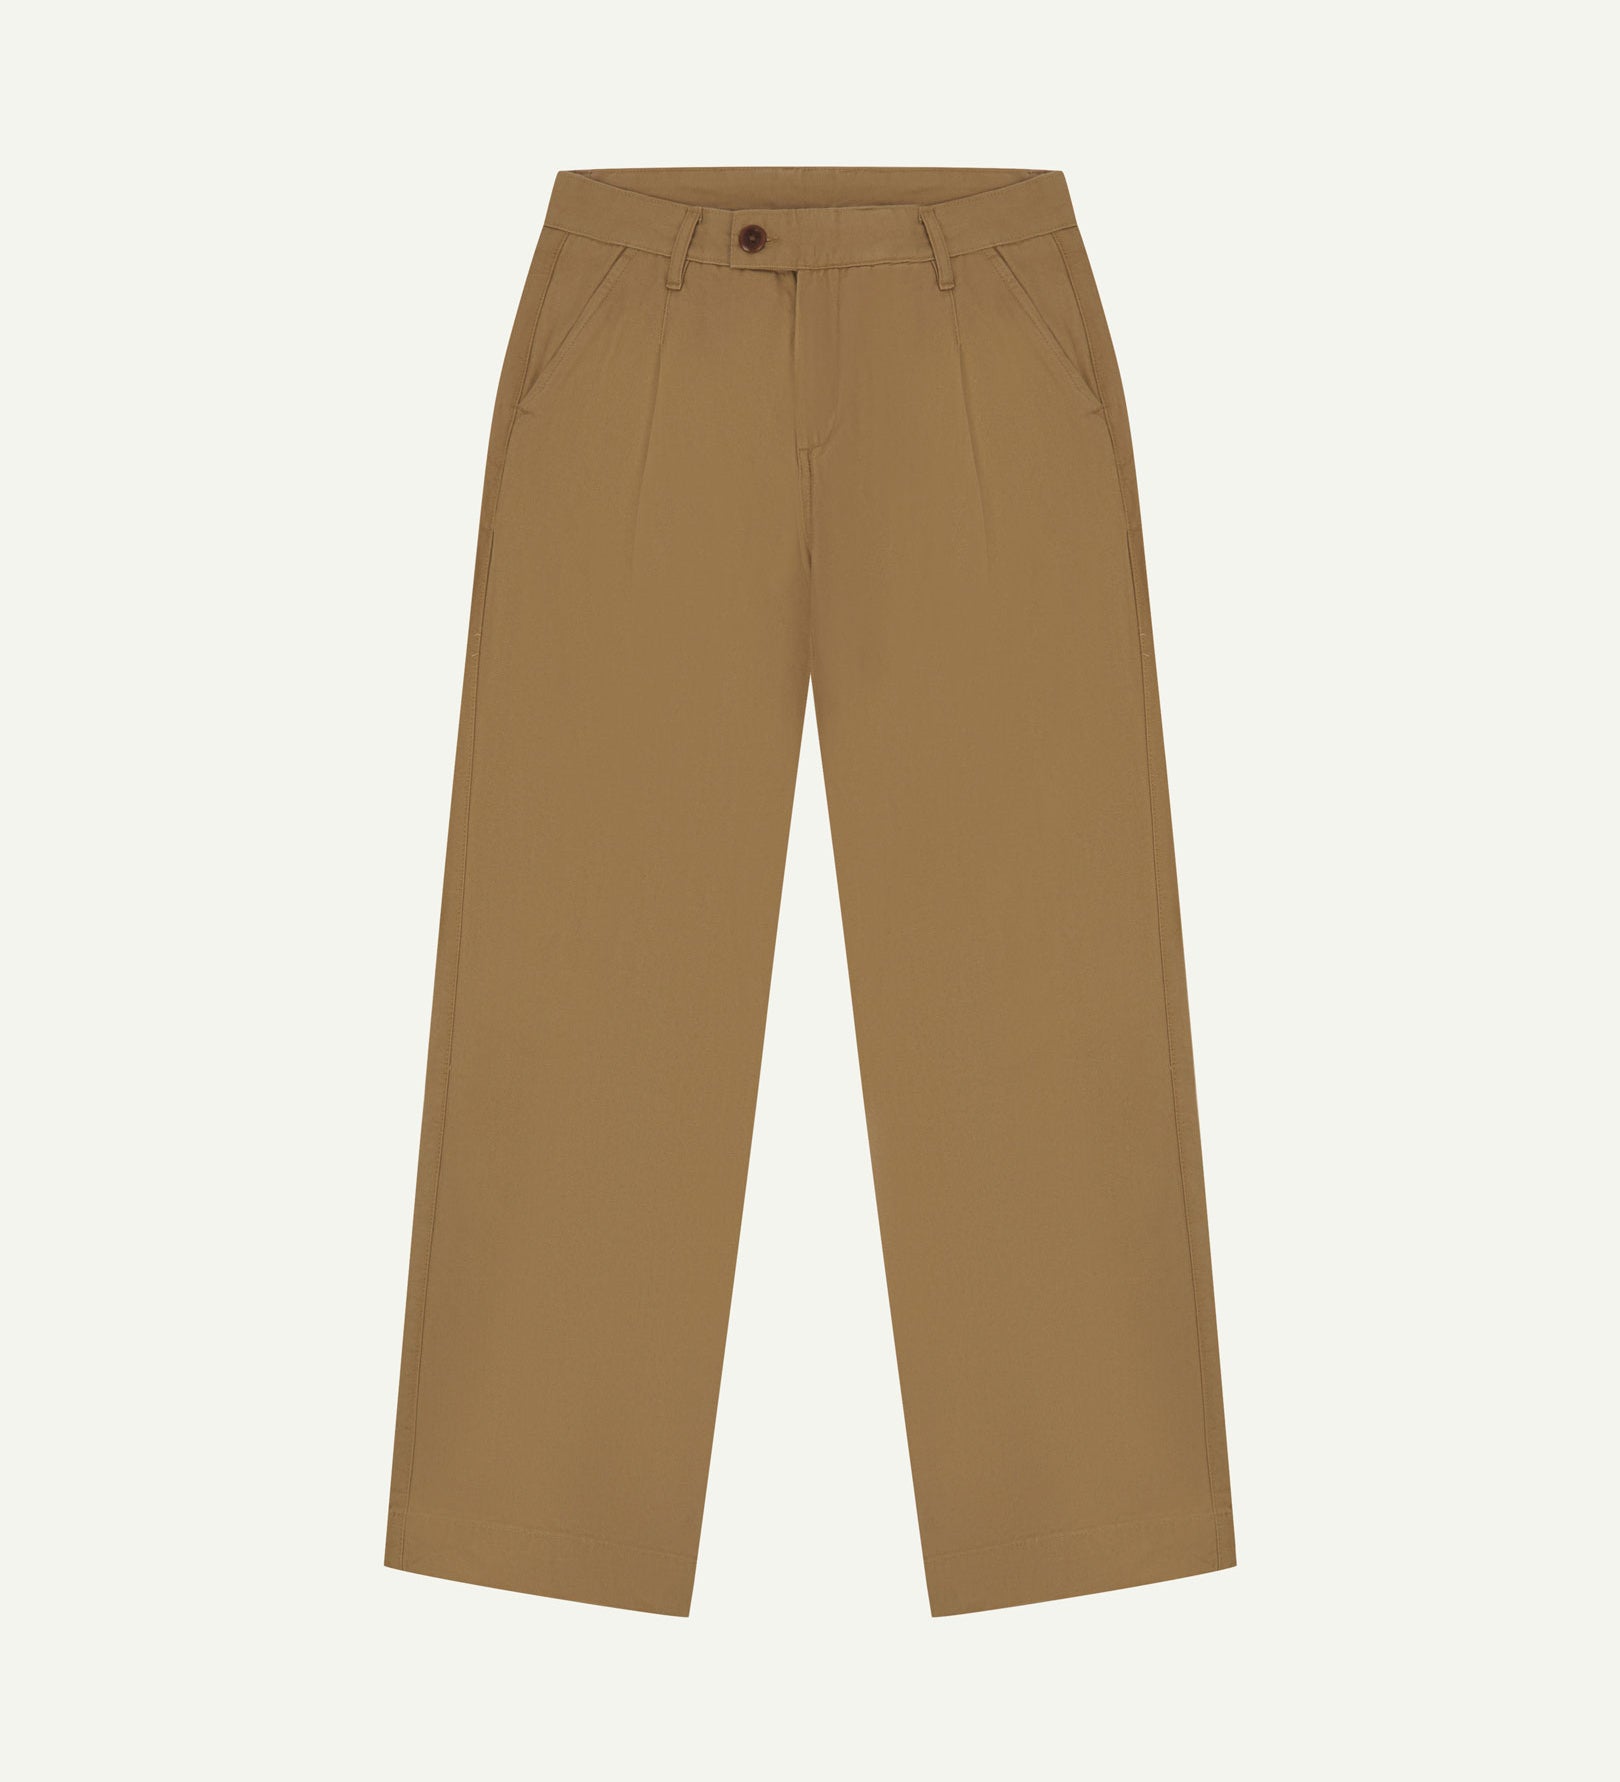 Front flat shot of 5018 Uskees men's organic mid-weight cotton boat trousers in khaki showing contemporary wide leg style.